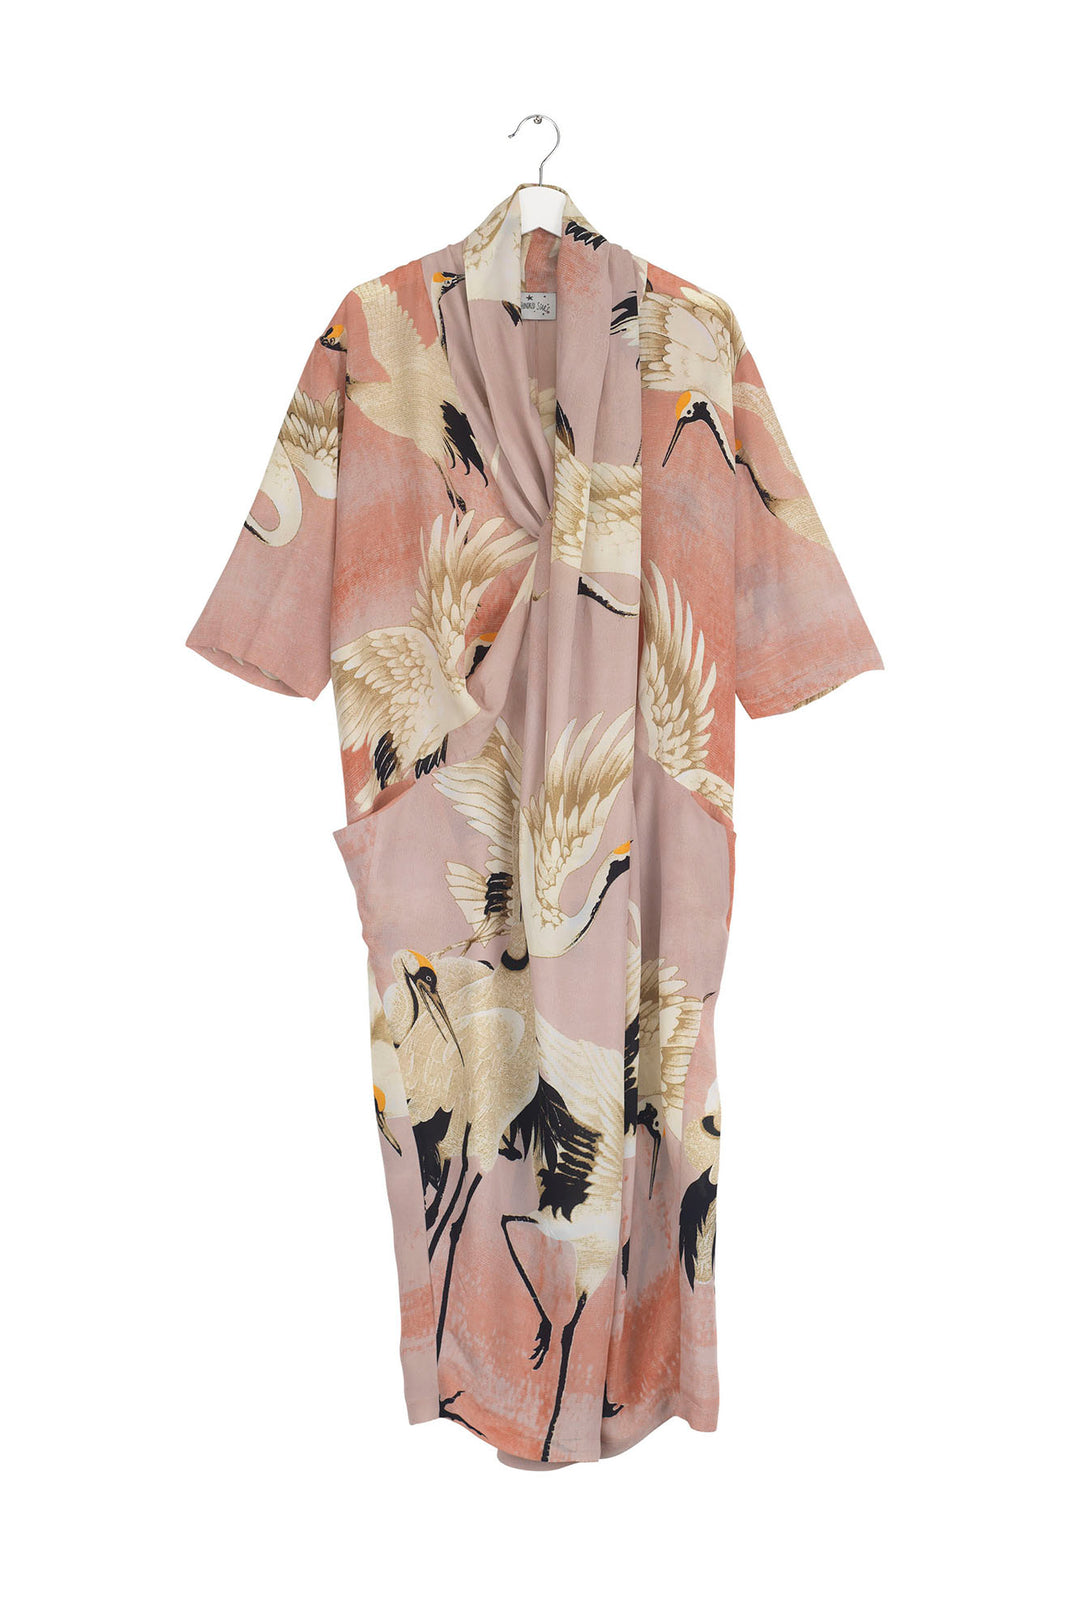 Storks and cranes have been a major art deco trend in both fashion and interiors and this Stork Plaster Pink Dress is perfect for anyone looking for something chic, stylish and in vogue!